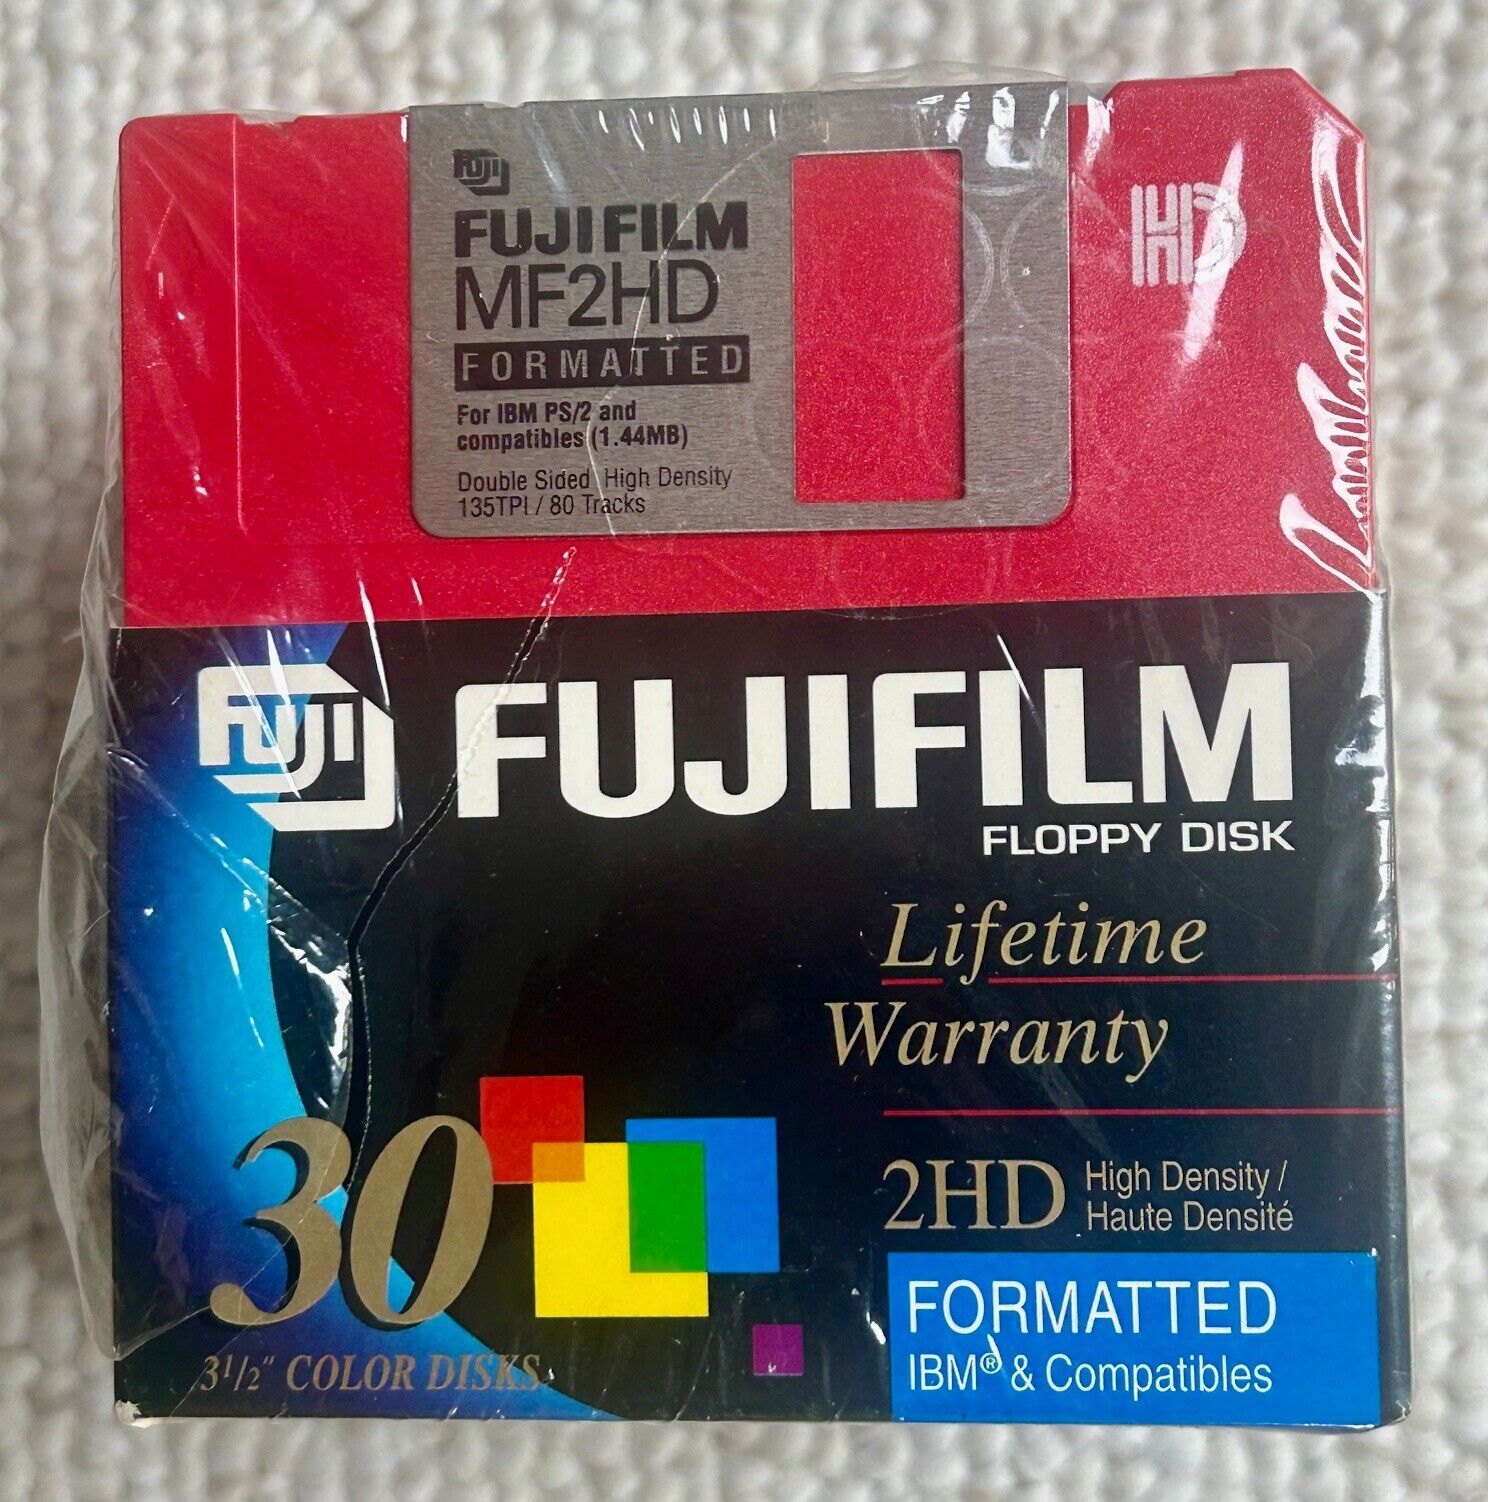 New 30 Pack FujiFilm  MF2HD 3 -1/2 inch formatted floppy diskettes - Multi color